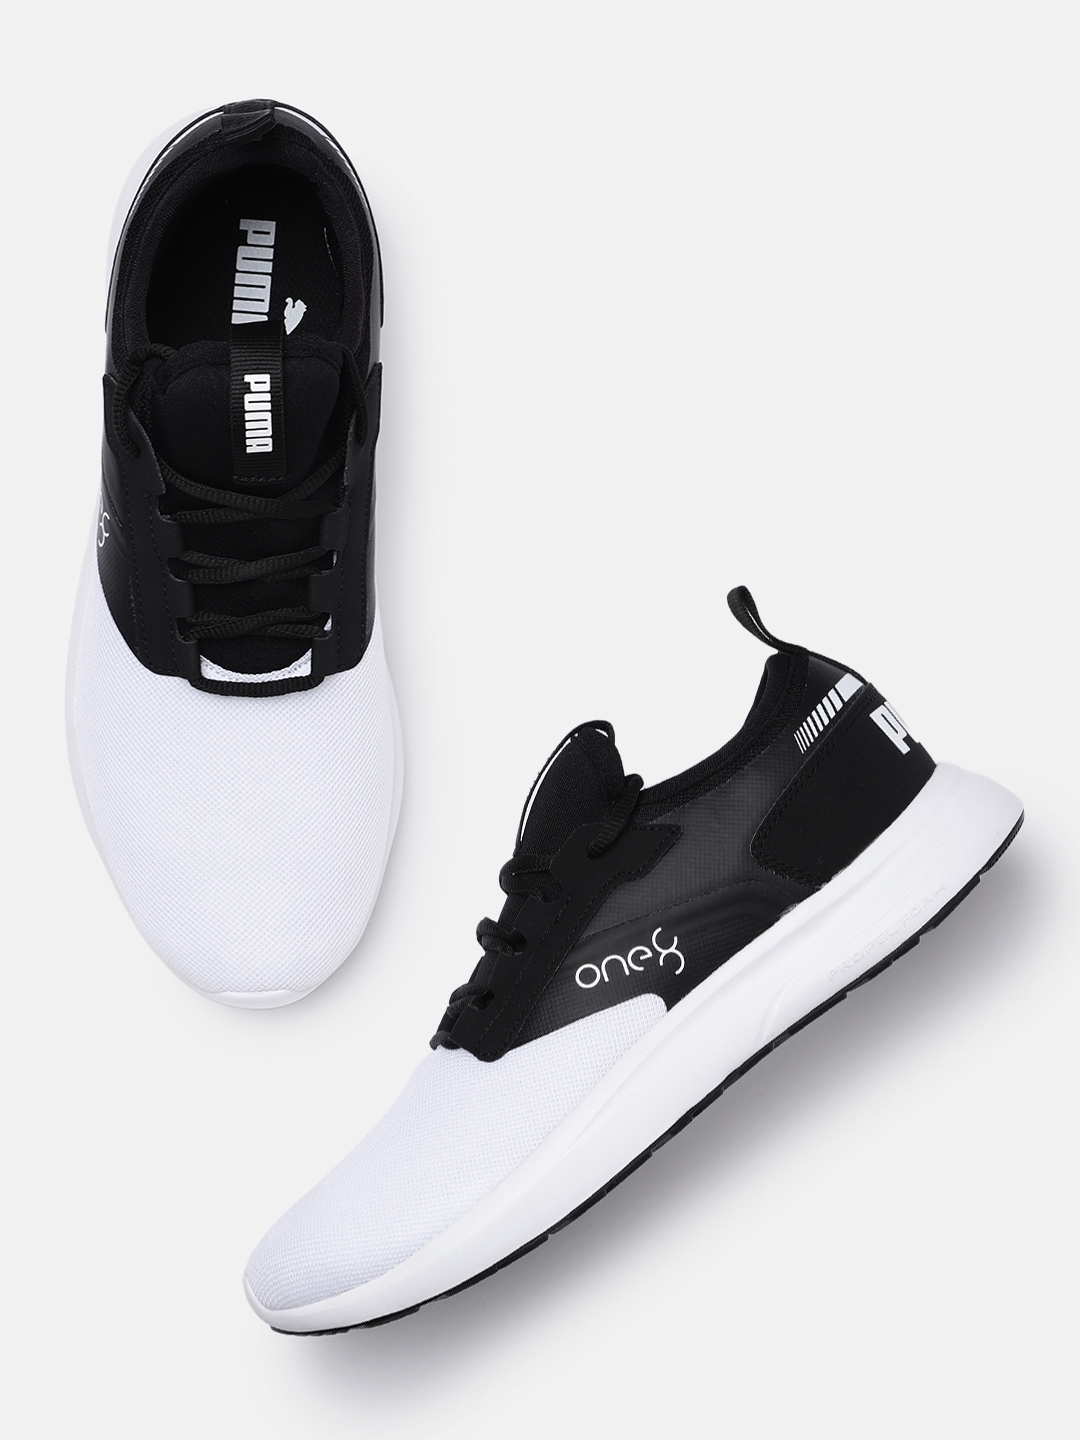 Puma Sneakers : Buy Puma Ace One8 Mens Black Sneakers Online | Nykaa Fashion